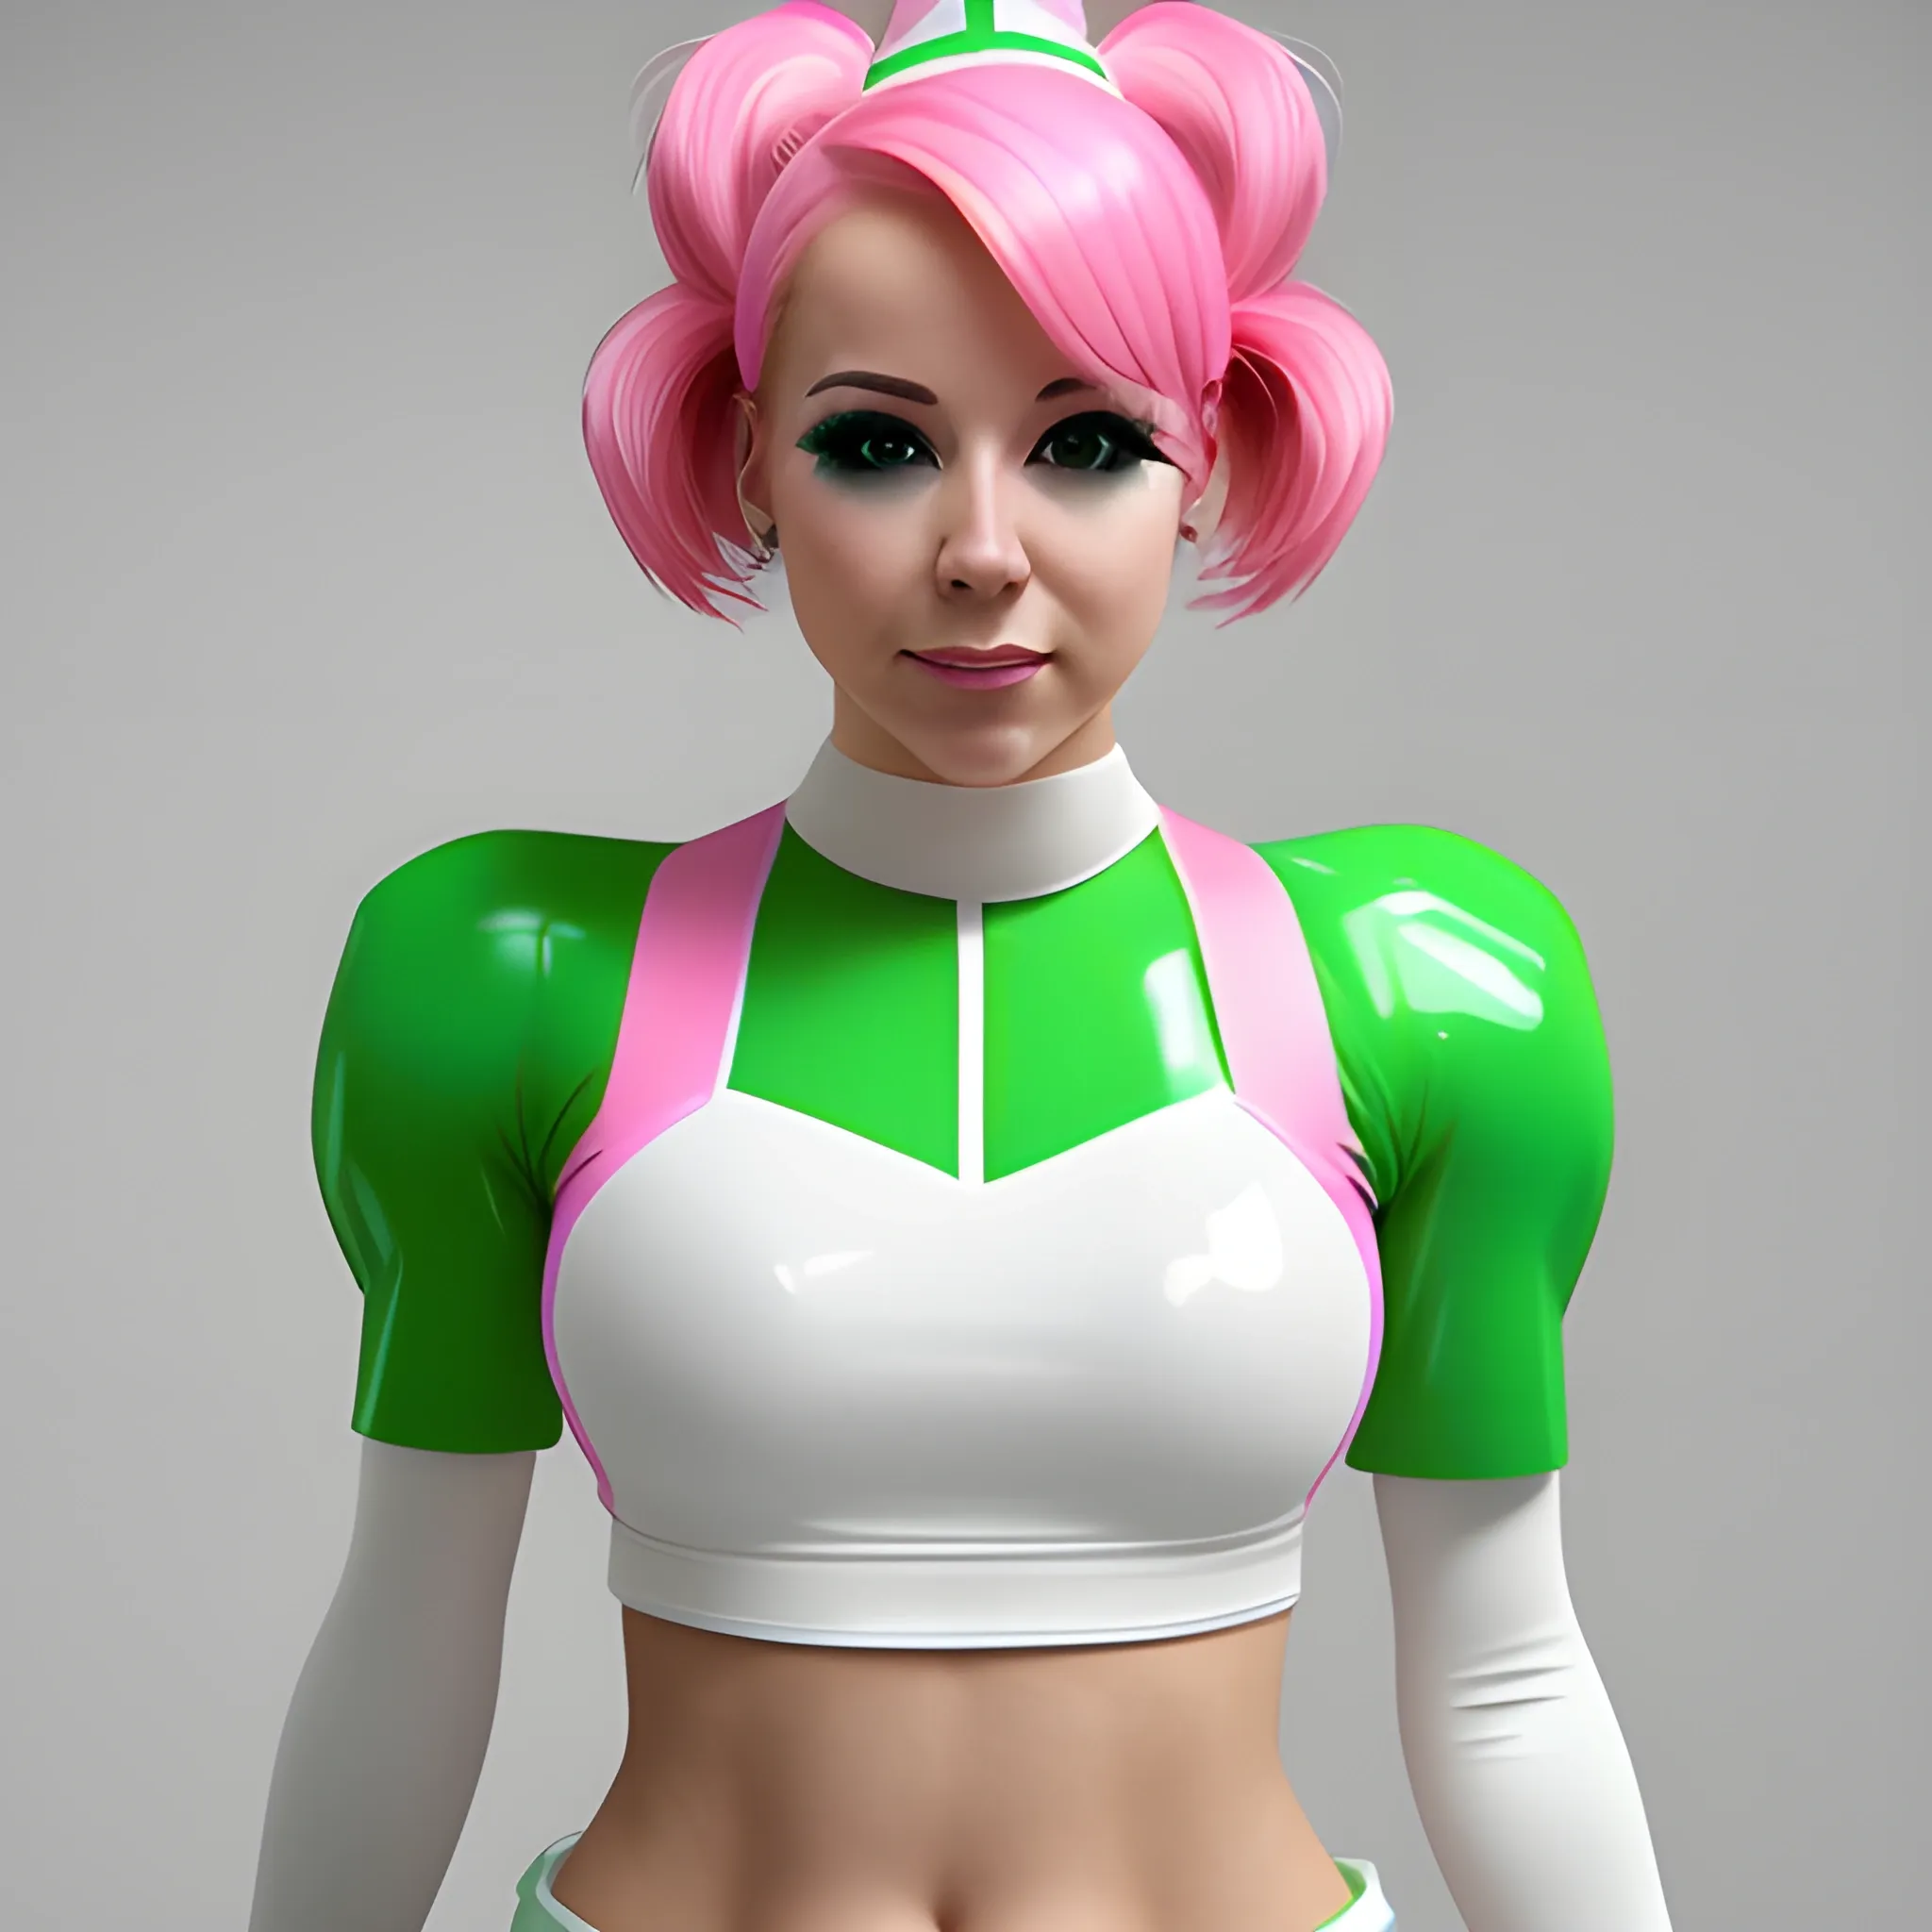 Photorealistic image of a cheerleader with pink hair, the costume made of latex, white on top and green on the bottom. Chest free and visible, high details 